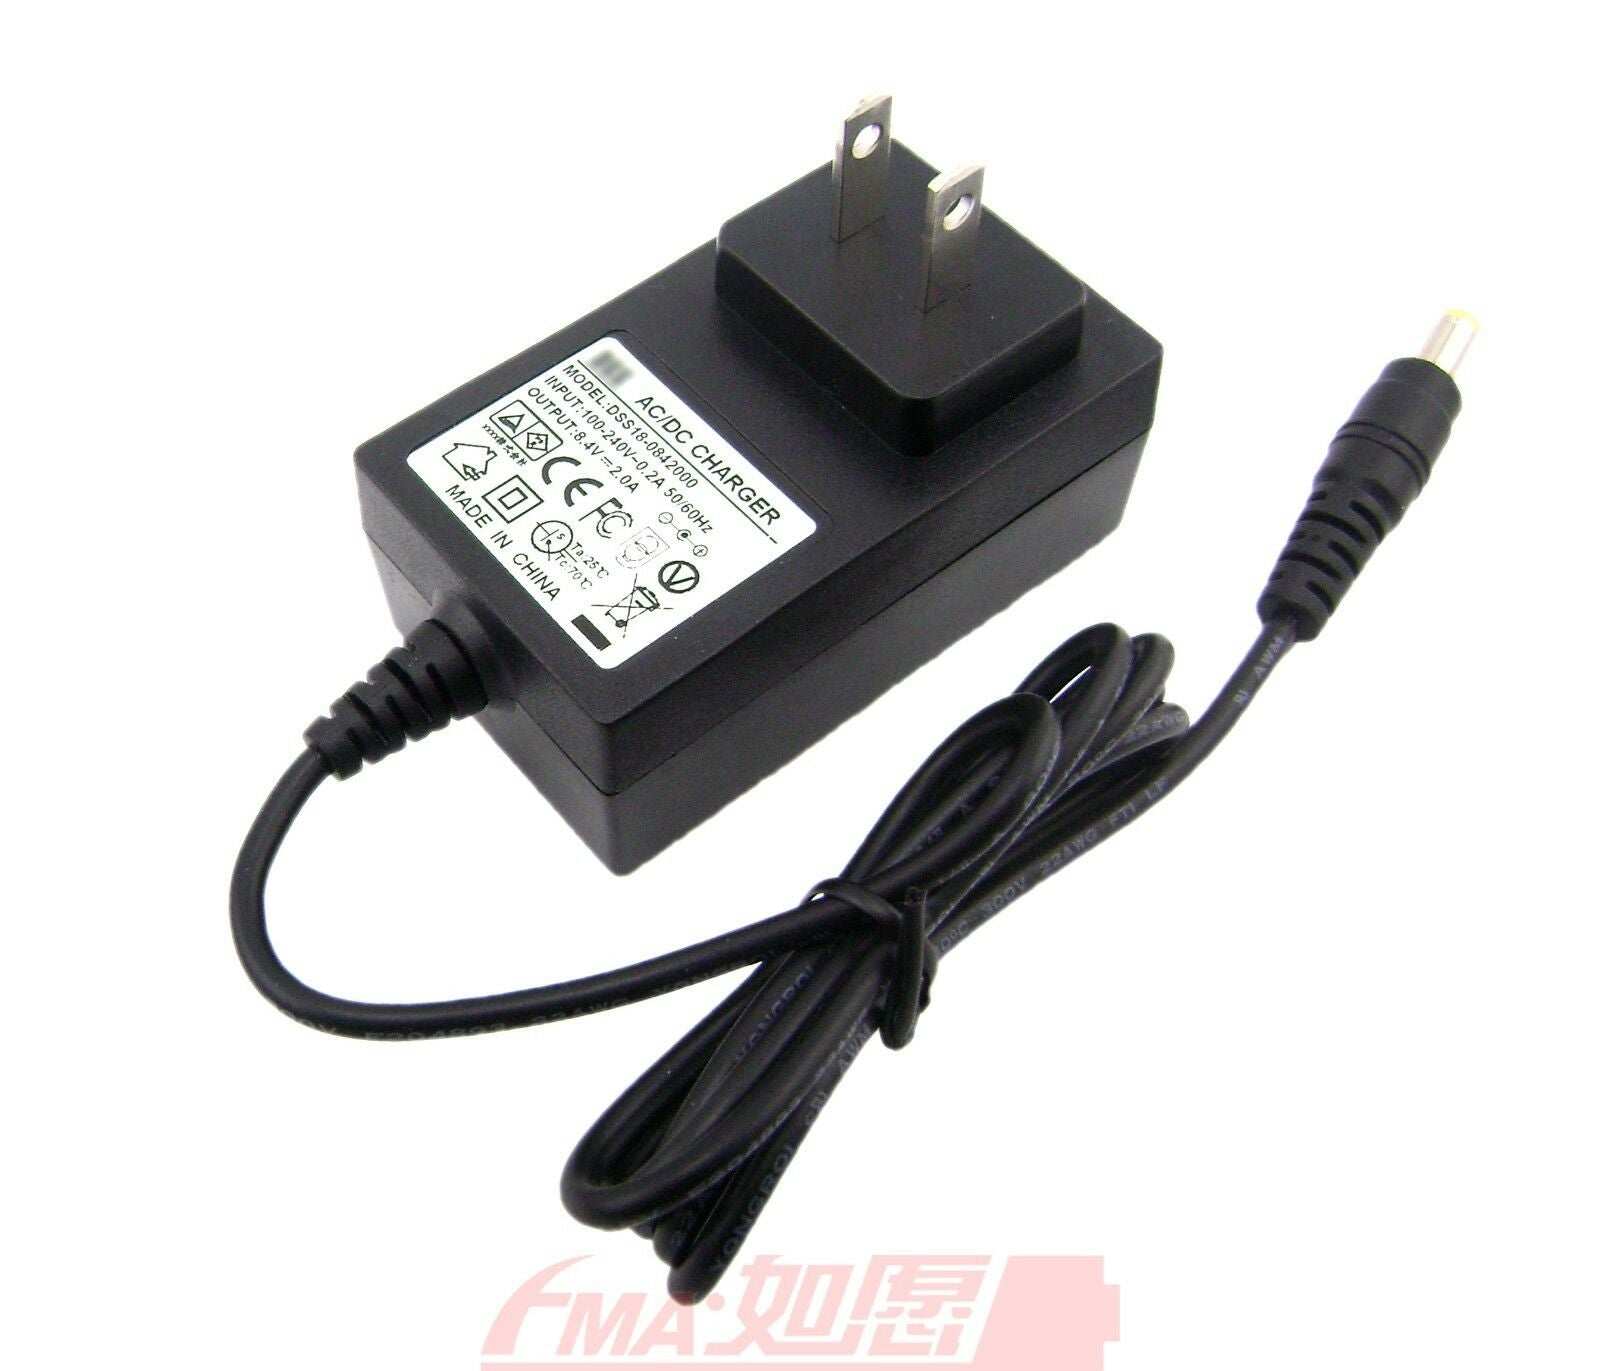 18W Smart Charger 8.4V 2A to 2S 7.4V Li-ion LiPo Battery CCC Certificated USF